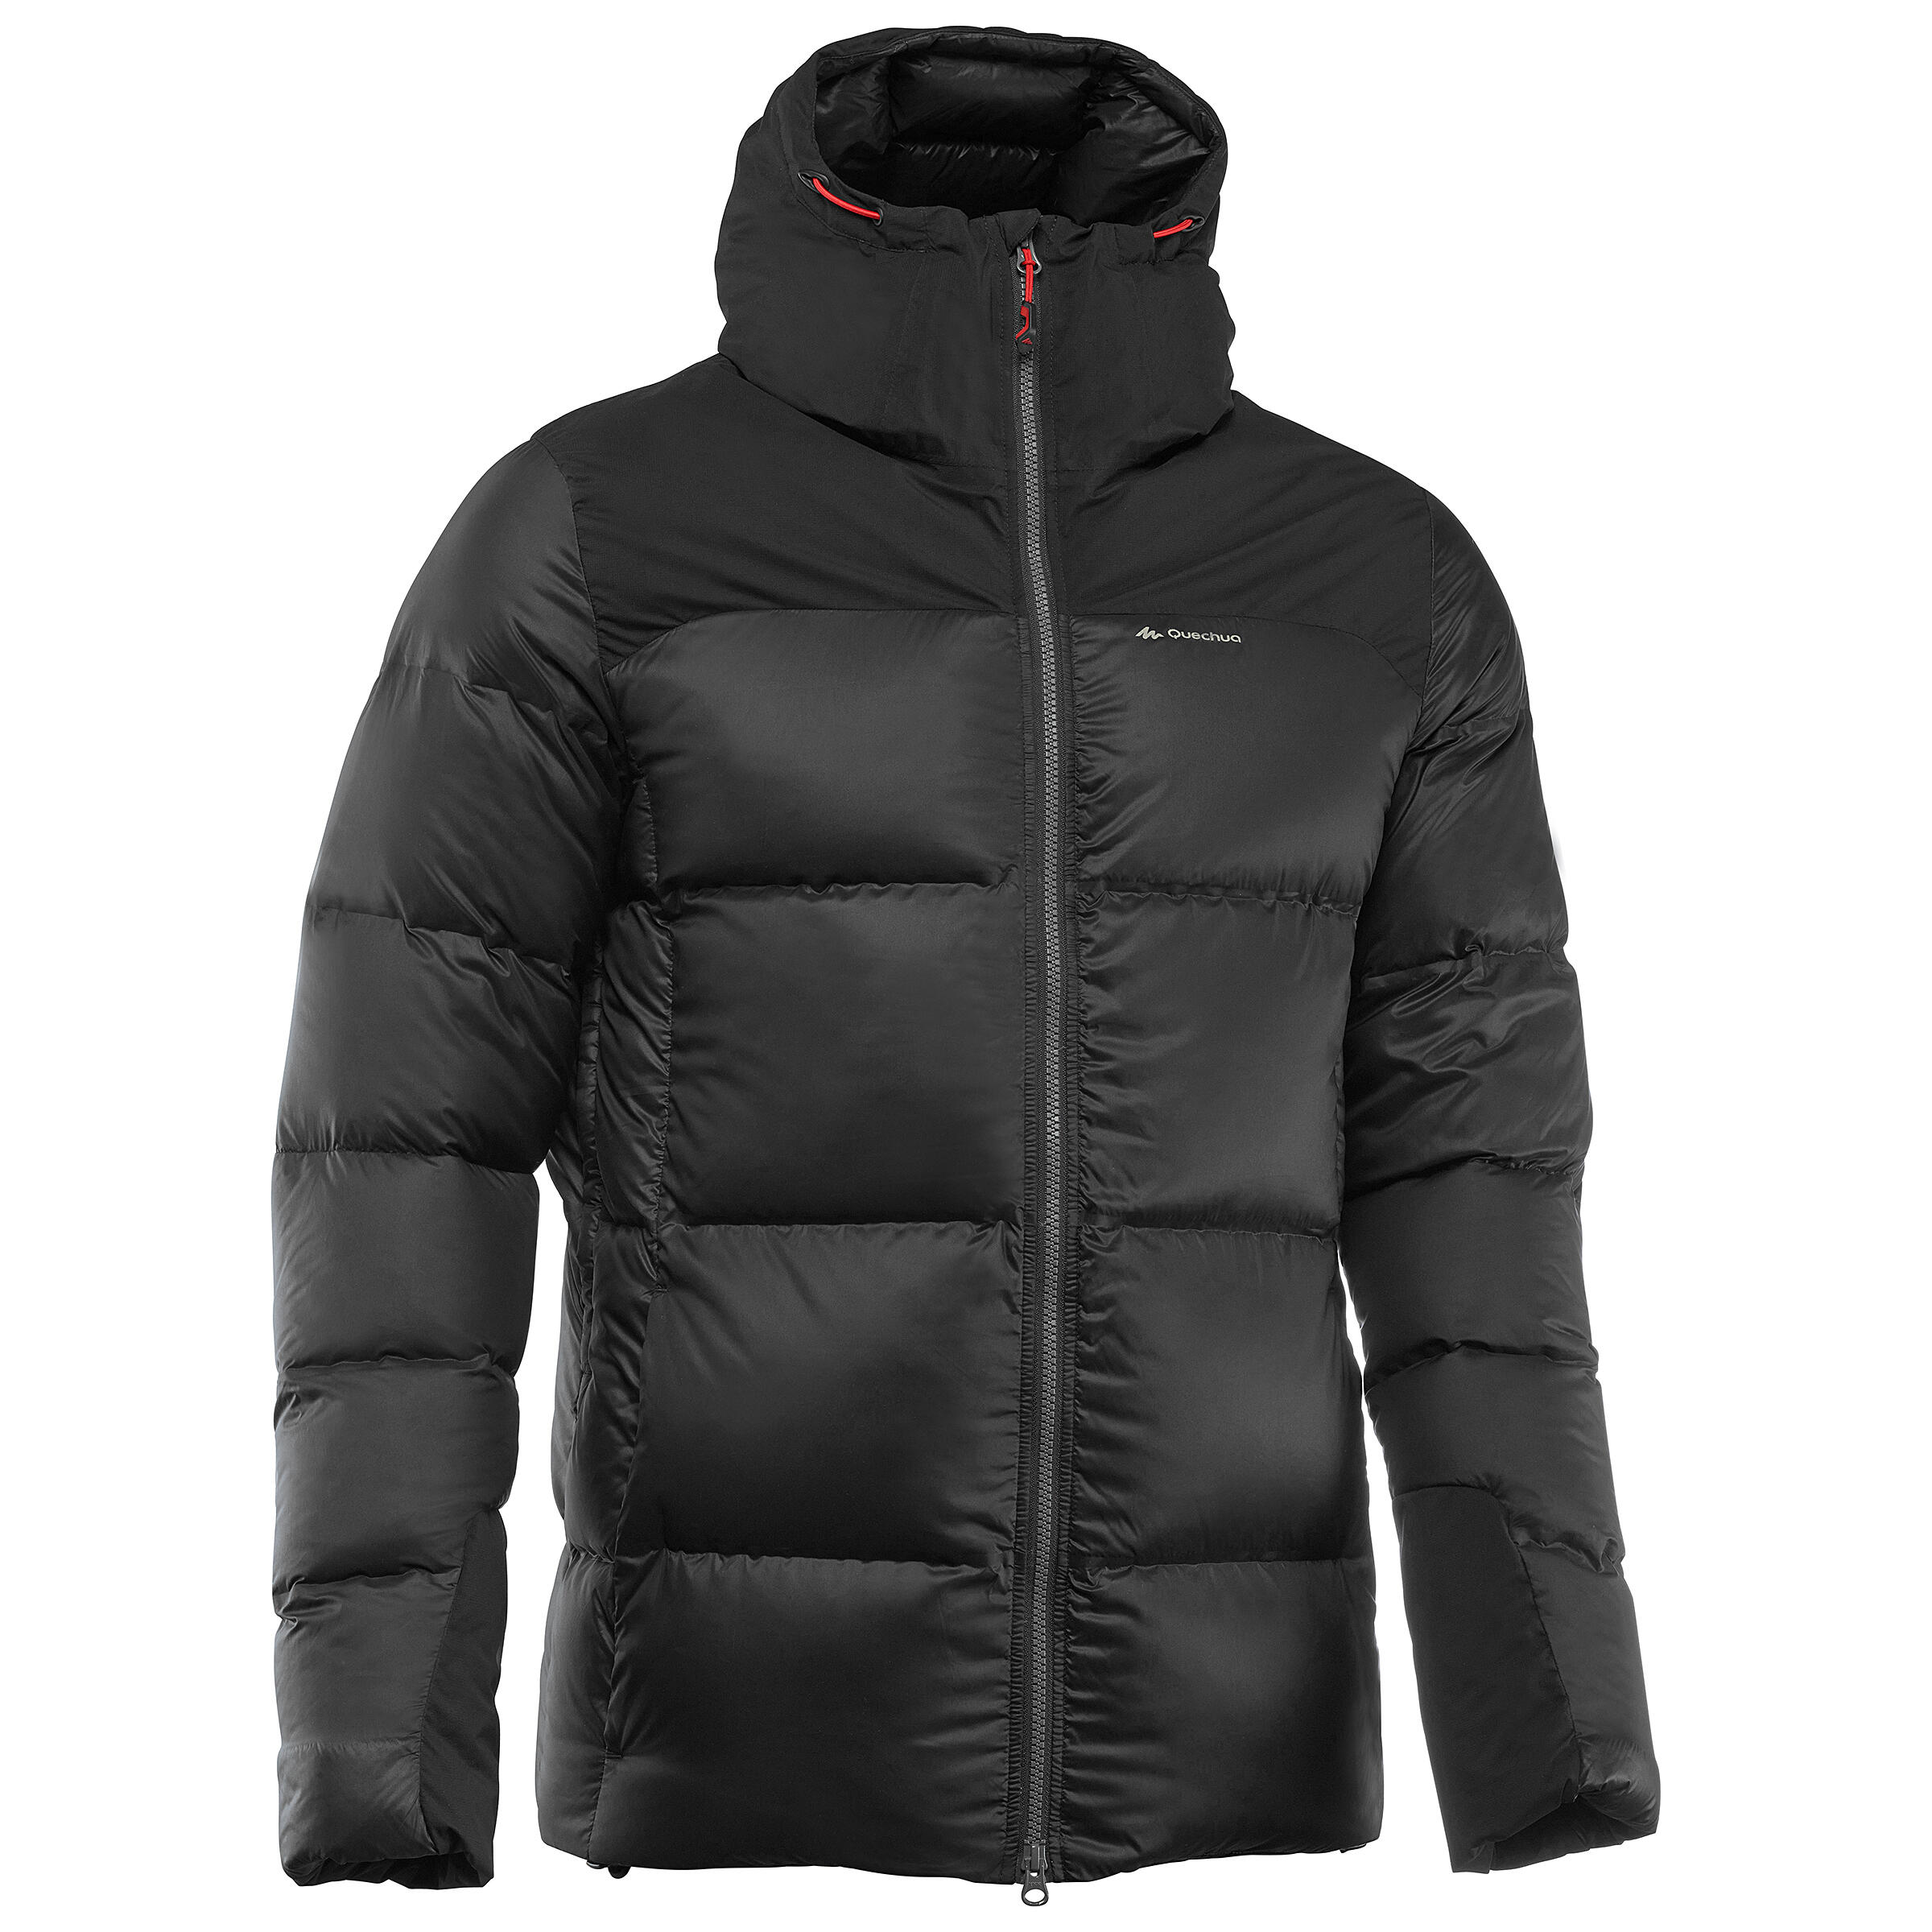 decathlon down jacket review